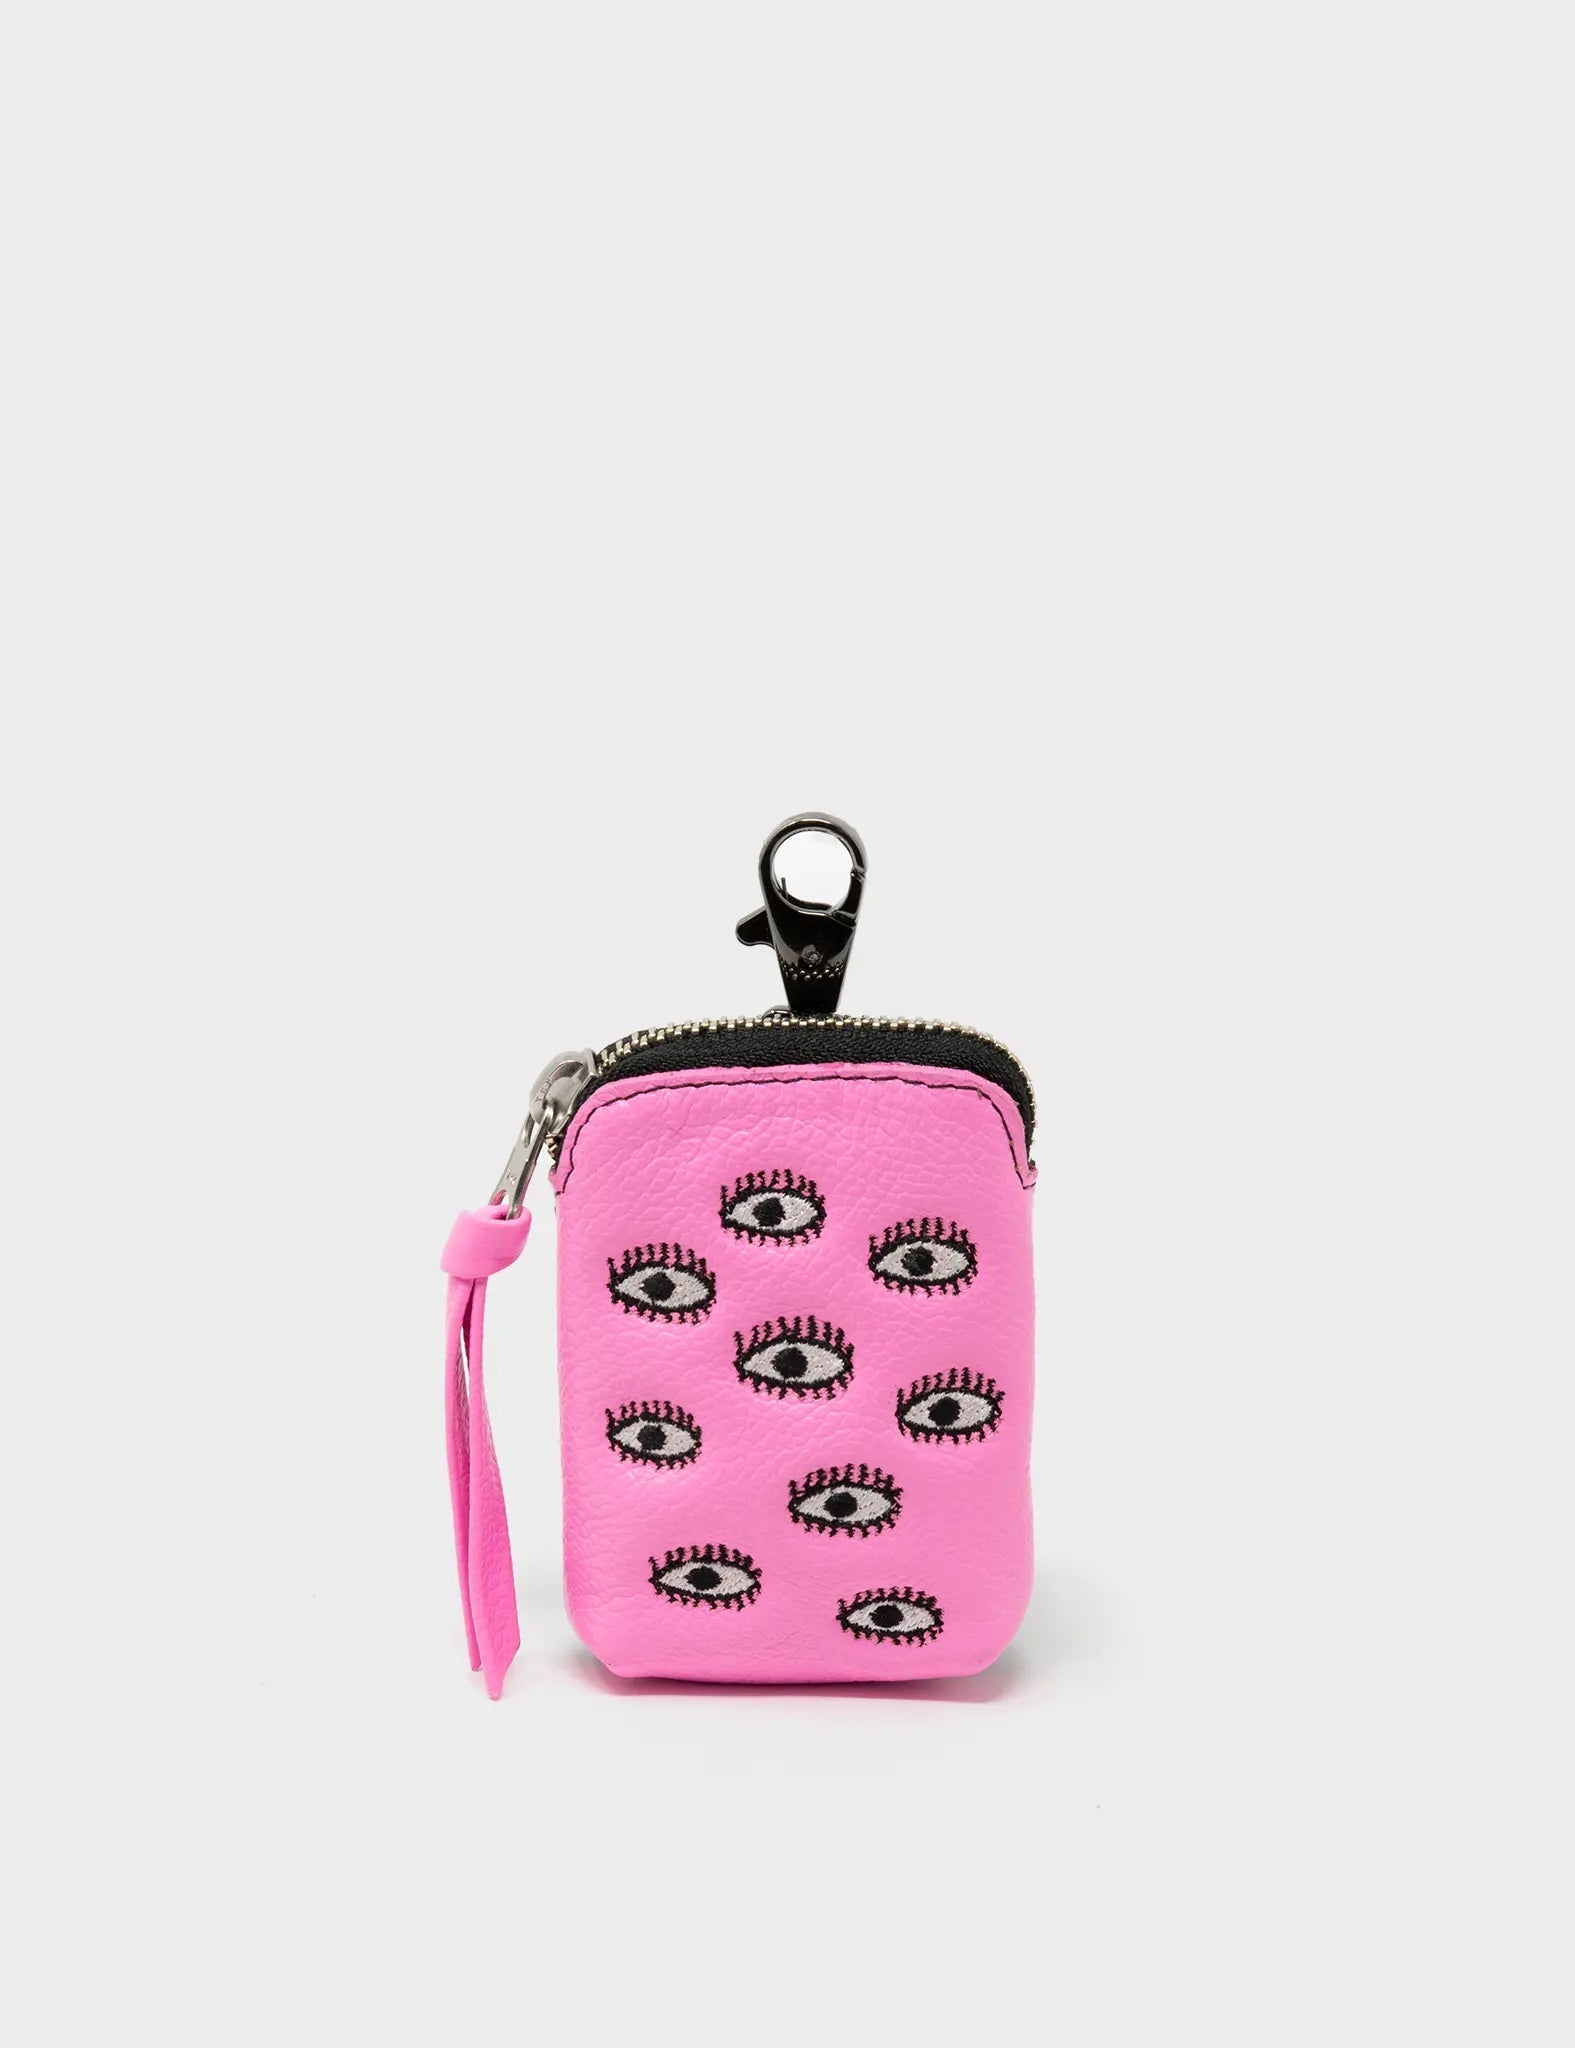 Frodo Wallet - Bubblegum Pink Leather All Over Eyes Embroidery – Min & Mon